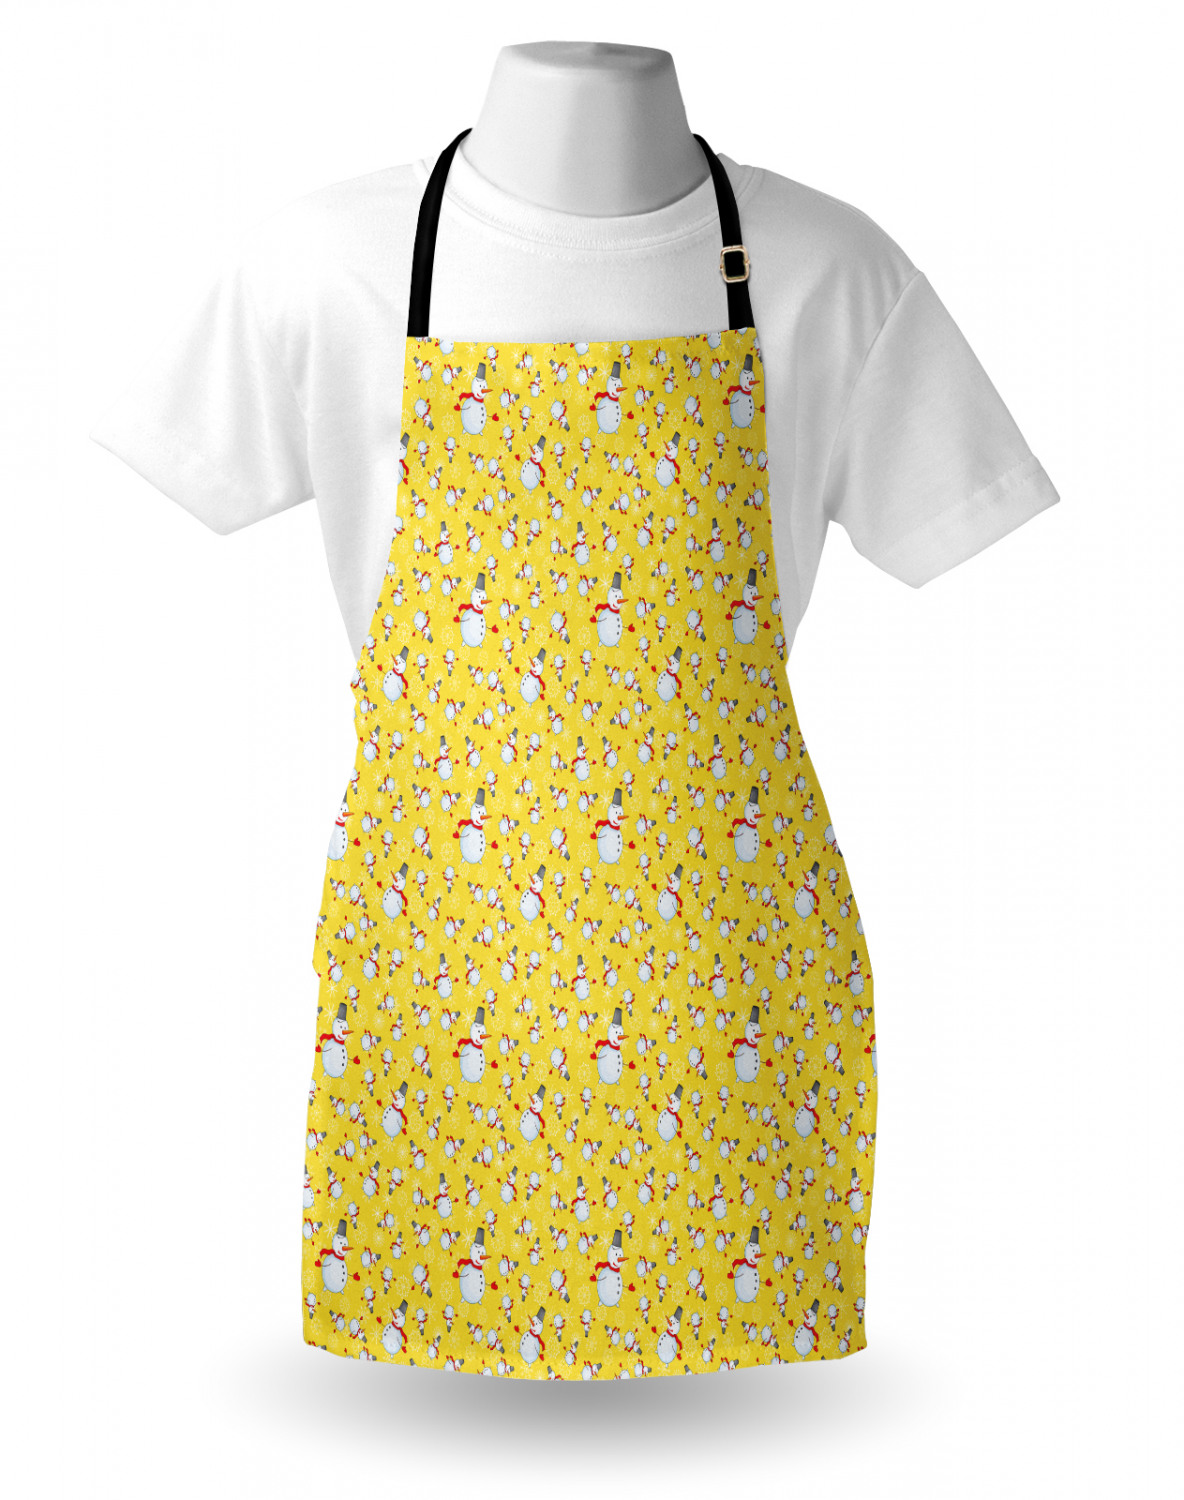 Details about   Ambesonne Apron Bib Adjustable Neck Strap for Gardening Cooking Outdoor Use 